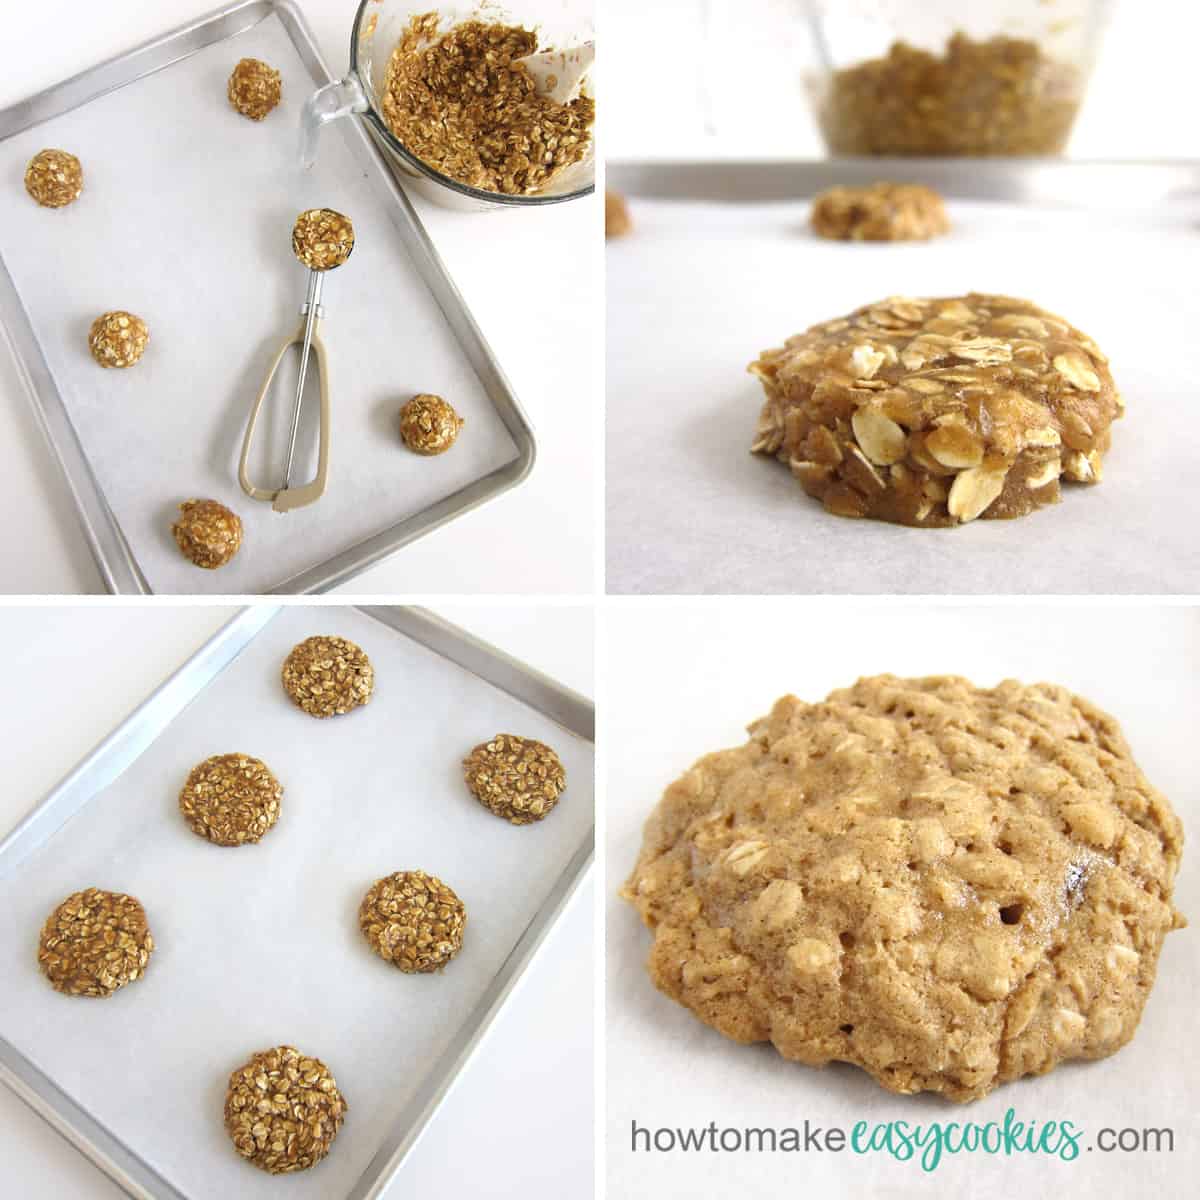 Scoop oatmeal cookie dough onto a cookie sheet, then flatten it out, and bake.